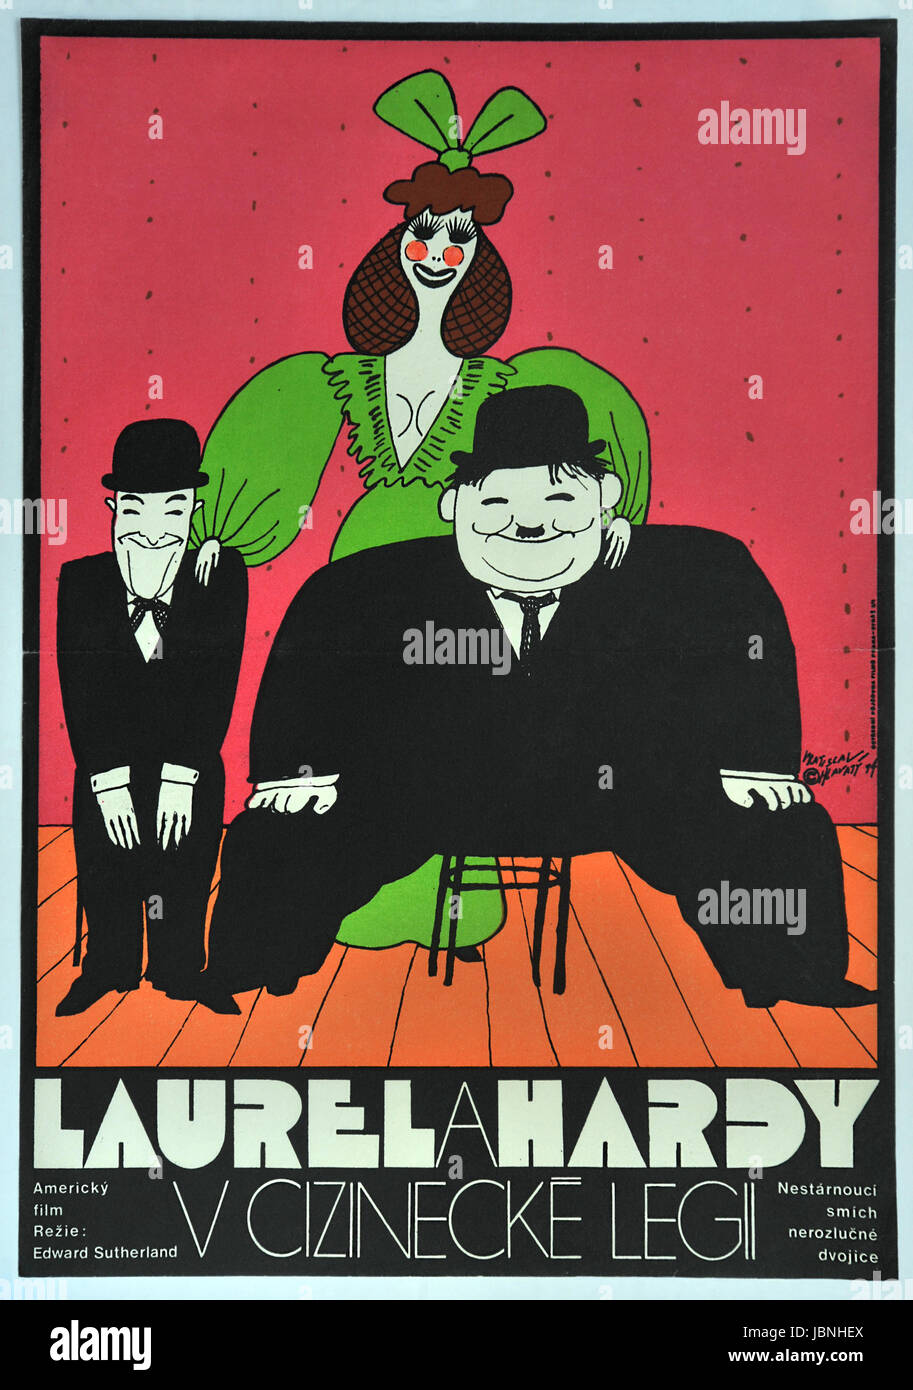 The Flying Deuces. Laurel and Hard in the foreign legi. Original Czechoslovak movie poster, 1974. American comedy of director Edward Sutherland, 1939. Stock Photo